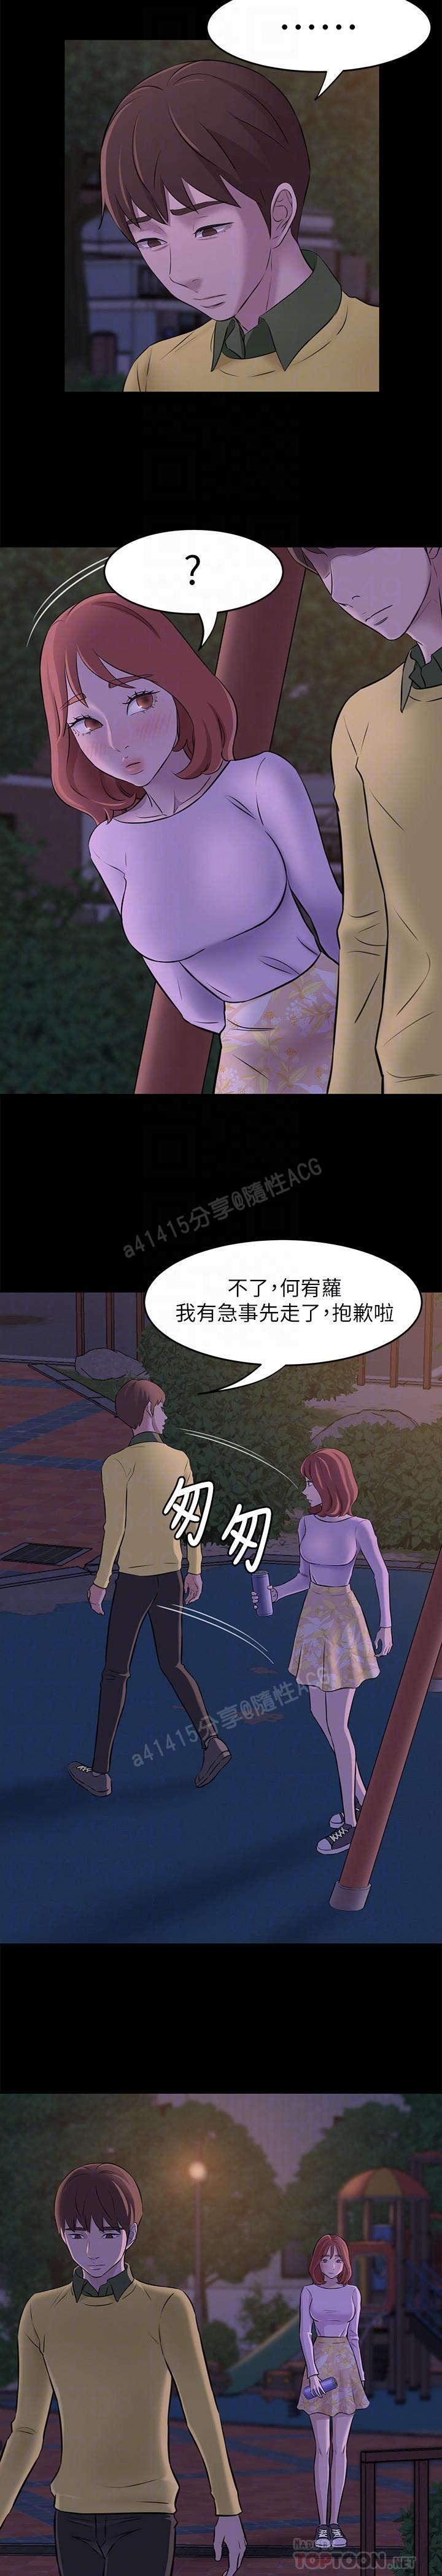 Tight Pussy Fucked panty note 小褲褲筆記 小裤裤笔记 01-35 连载中 Hugecock - Page 11